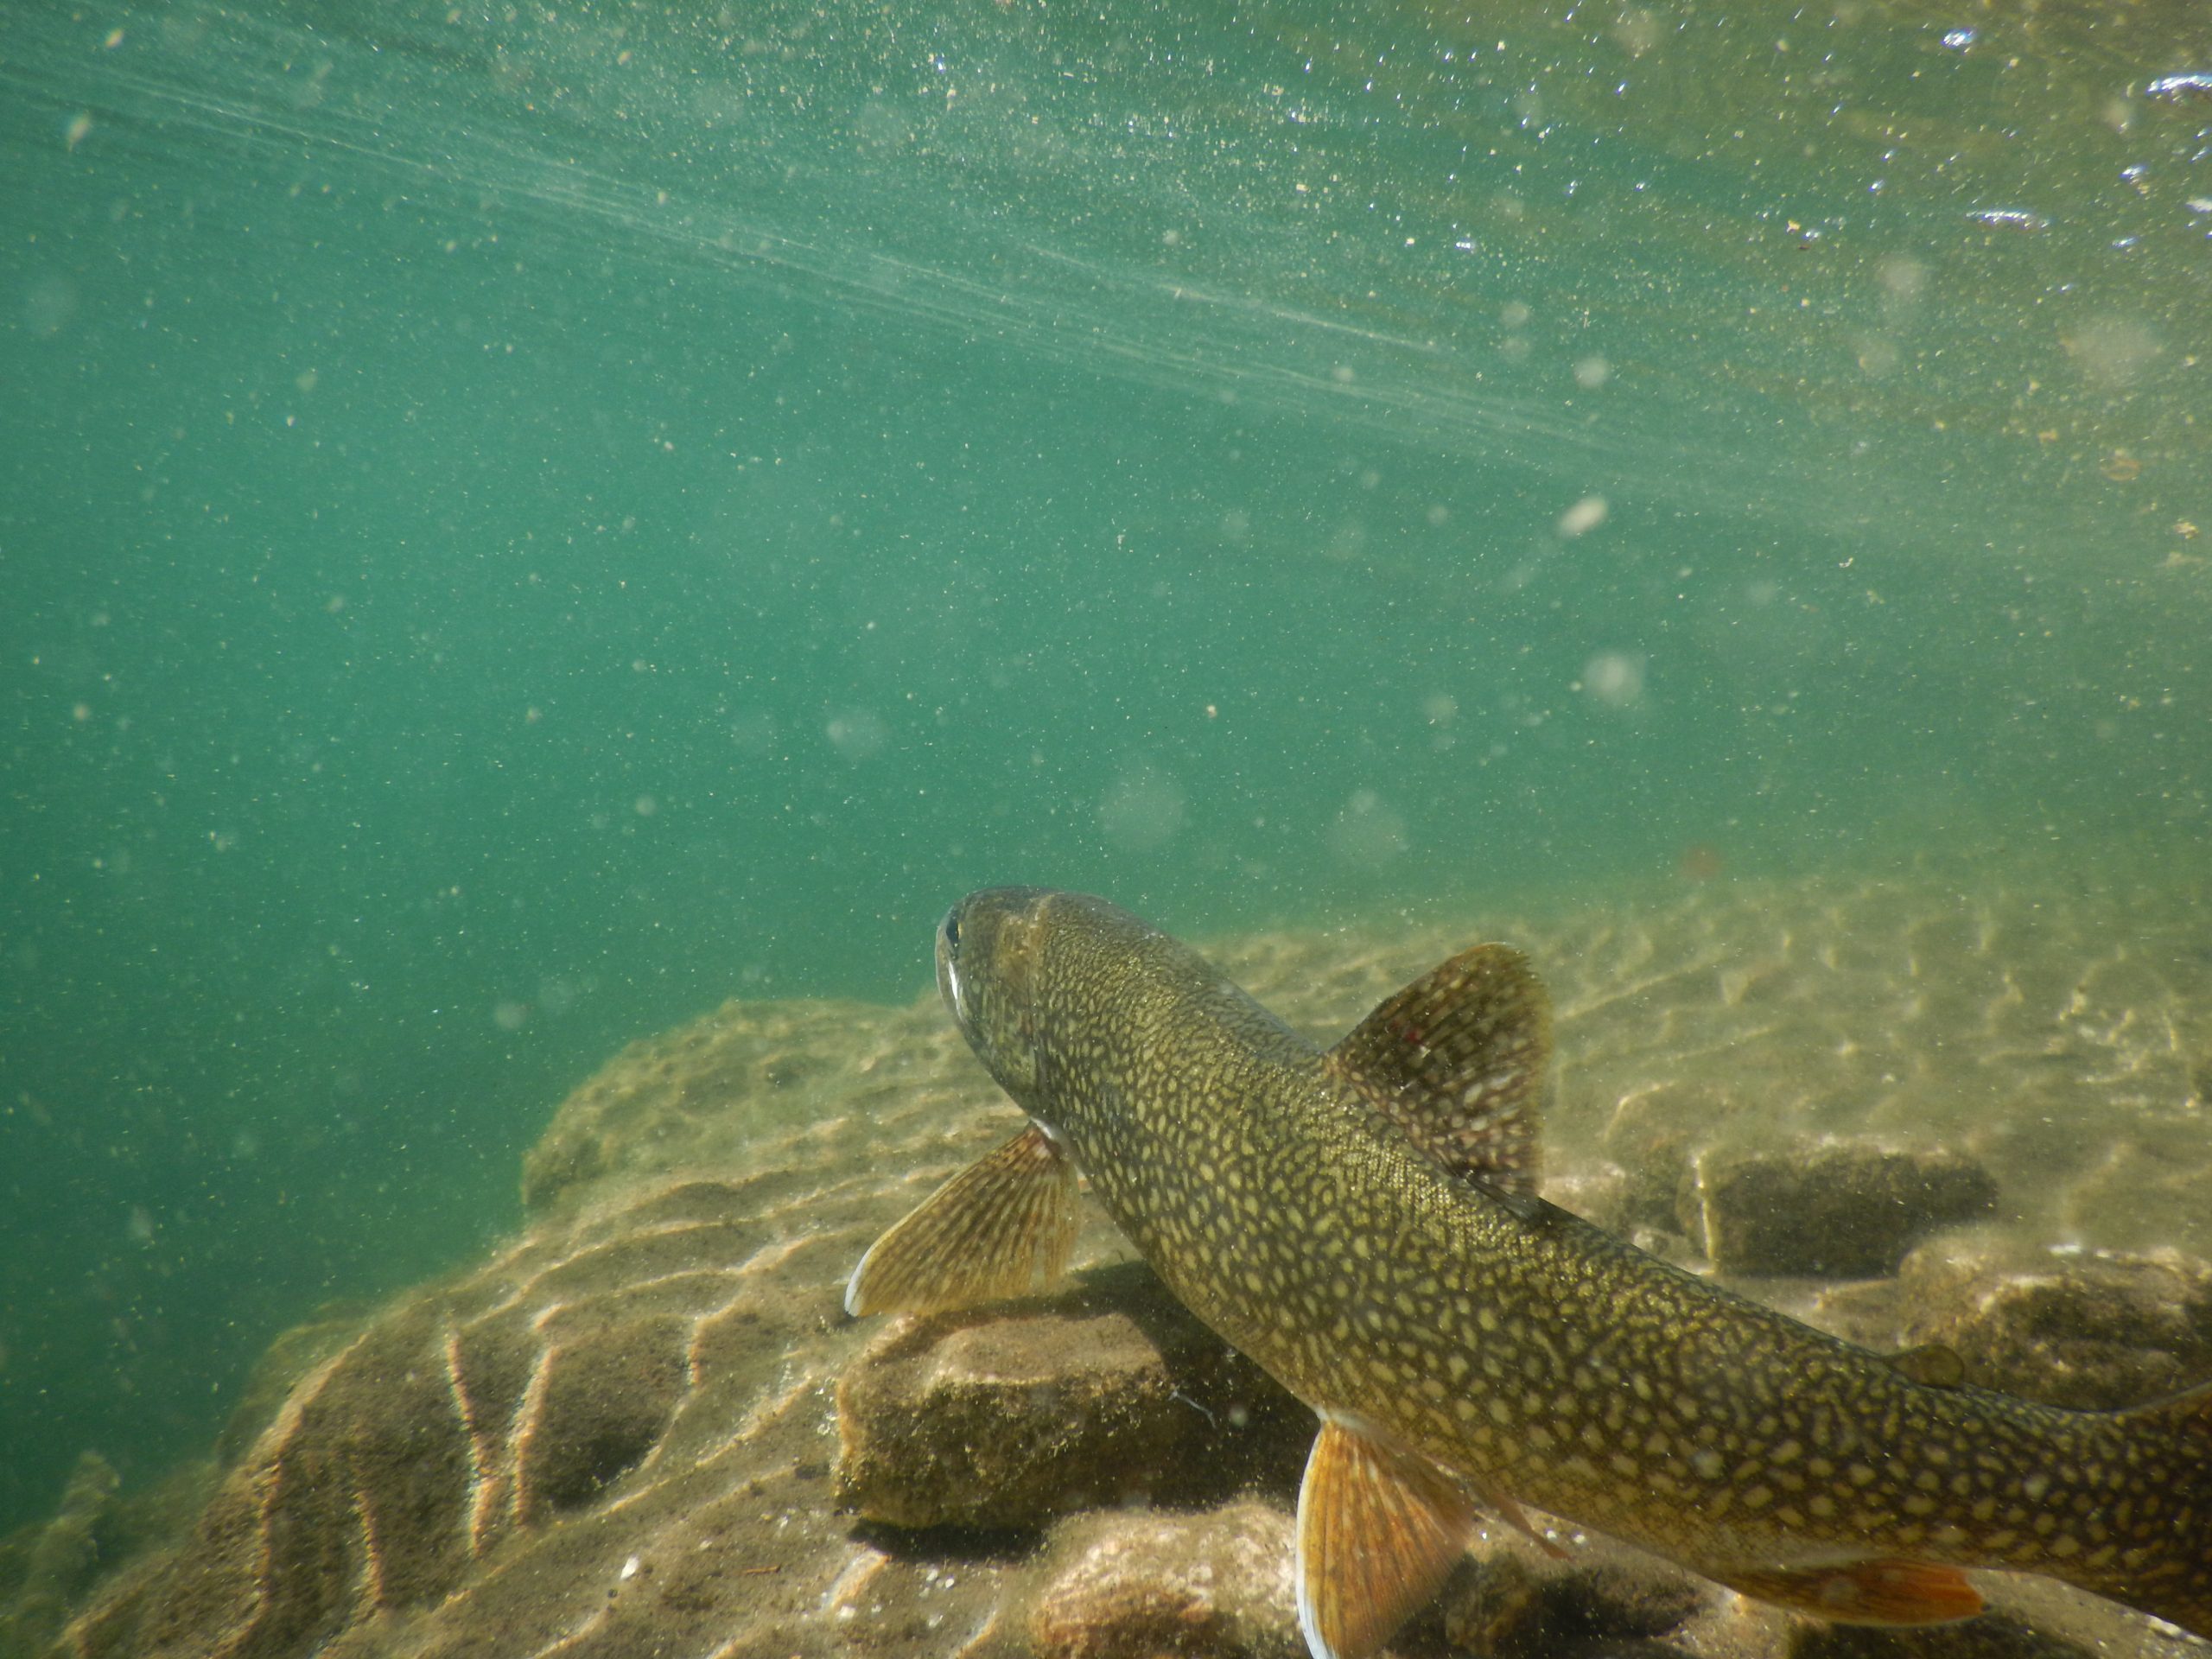 Lake trout is released underwater | IISD Experimental Lakes Area